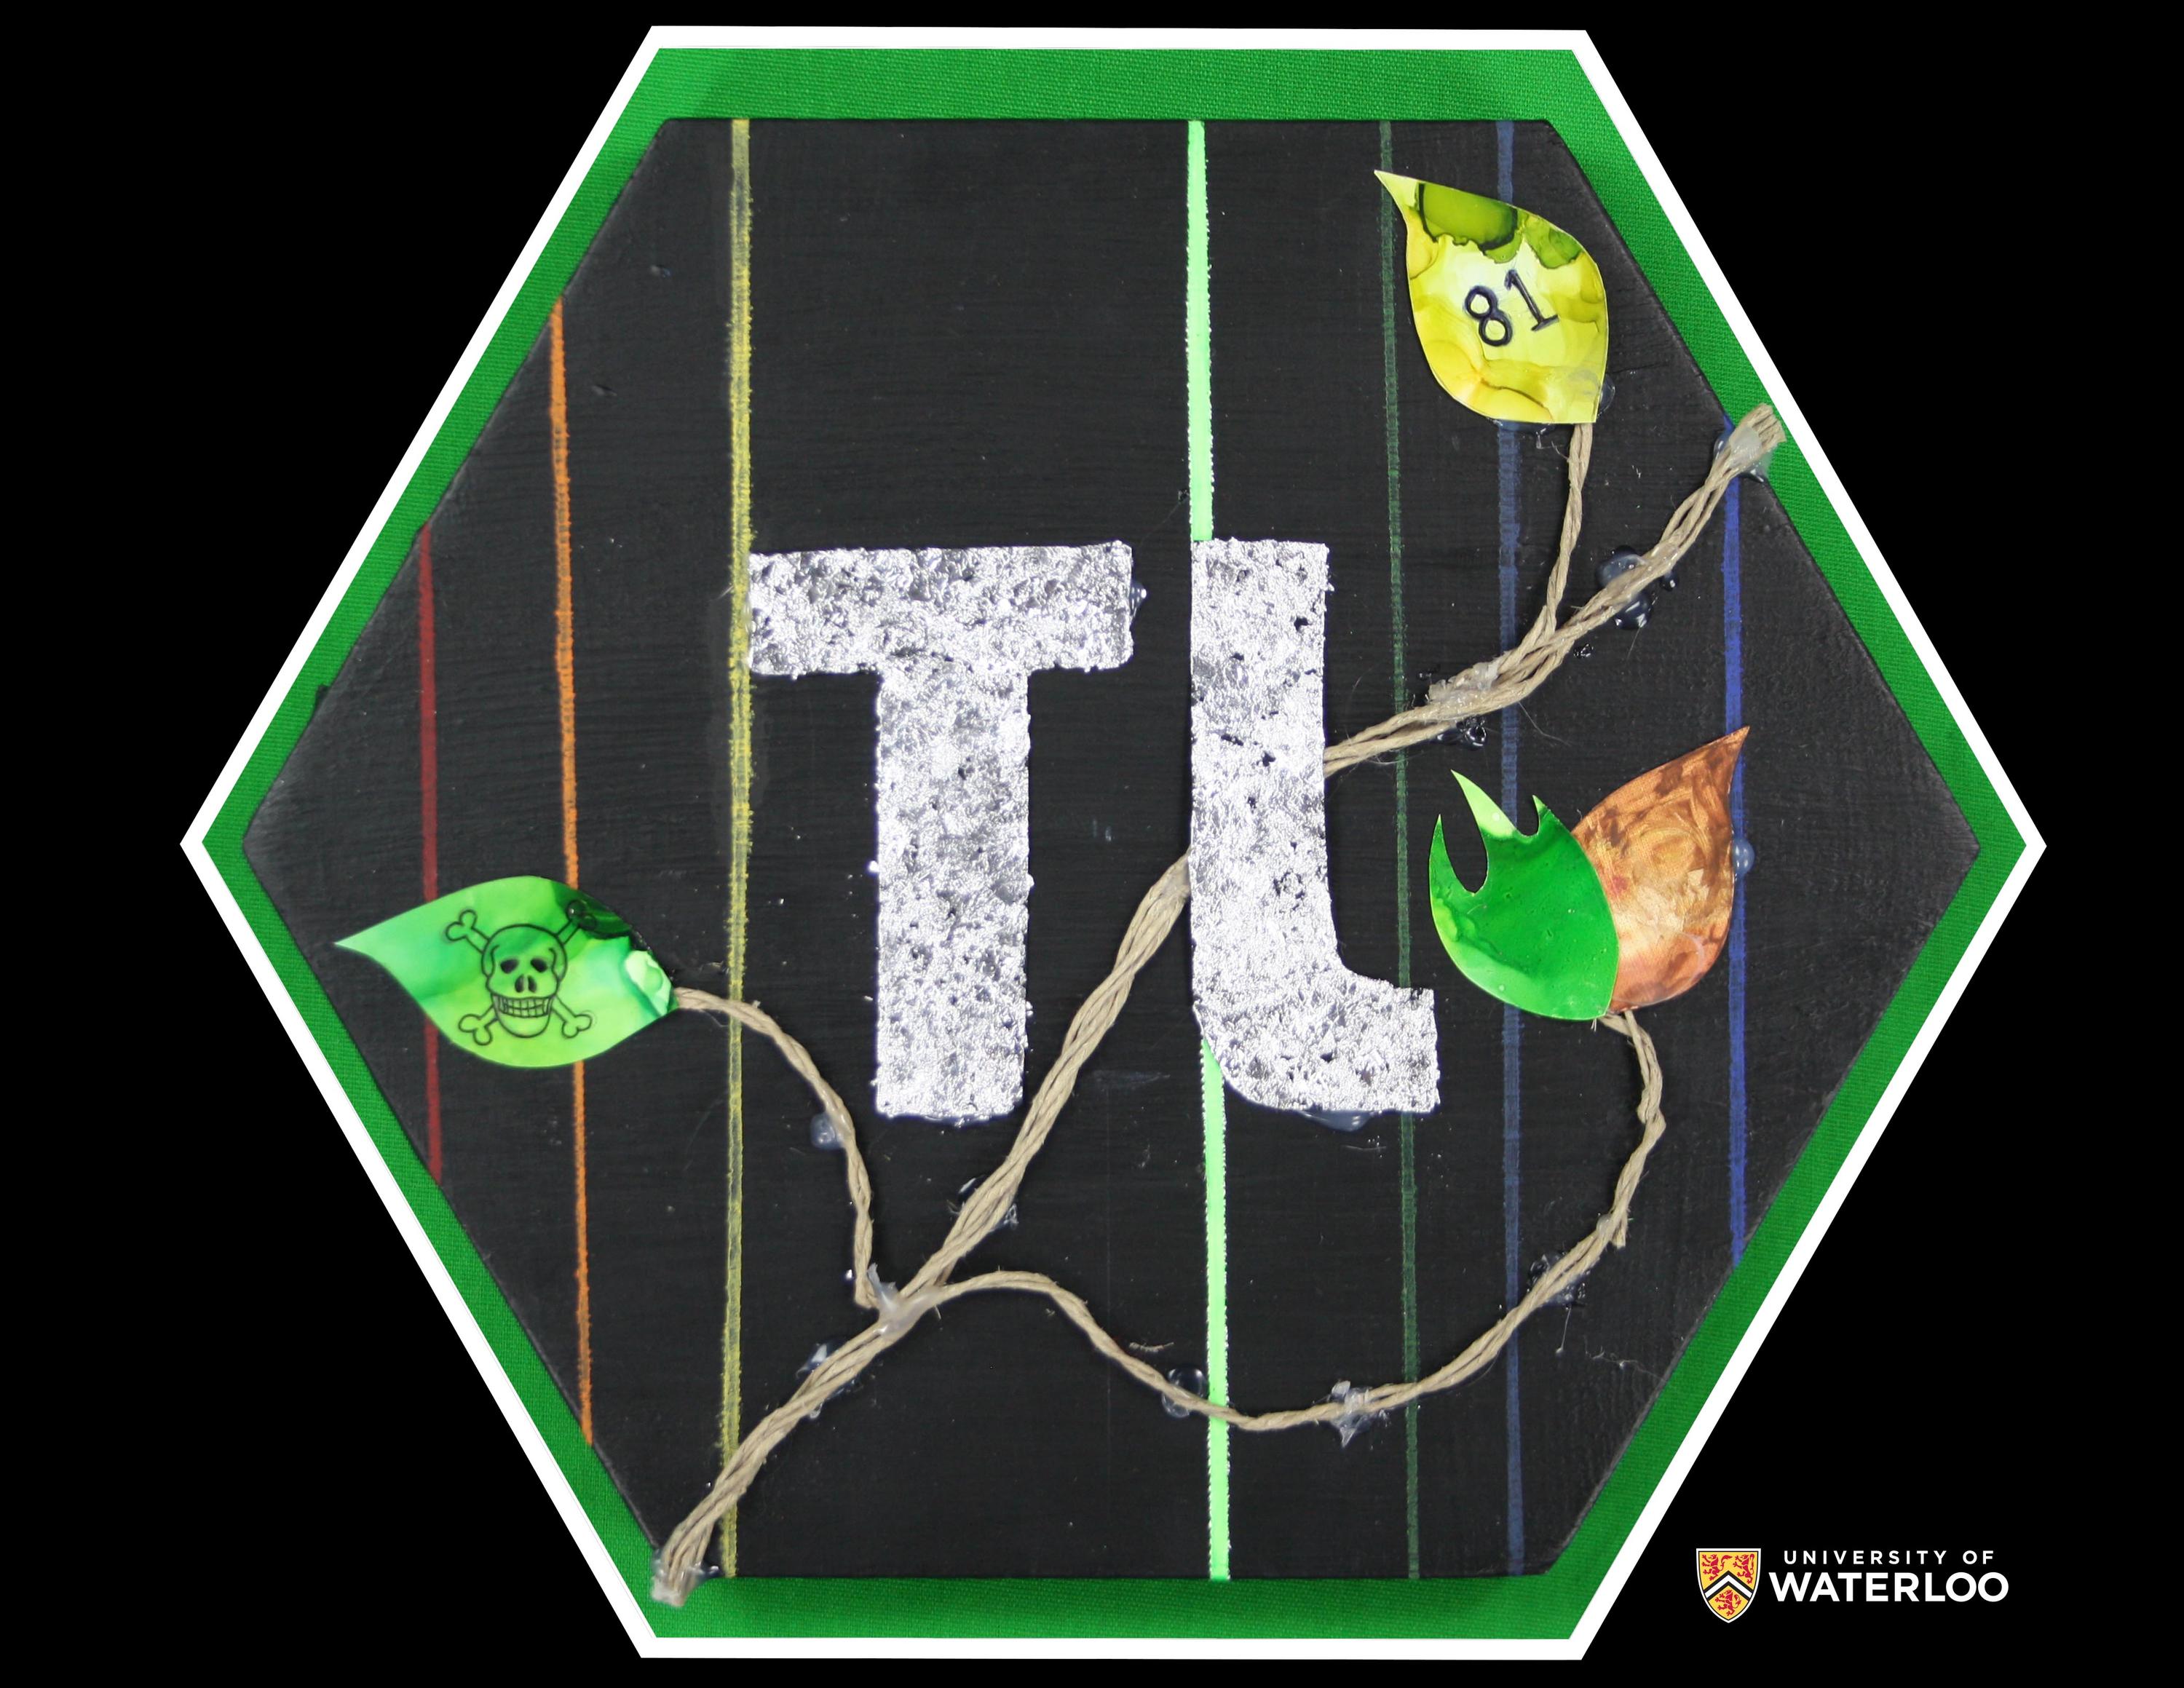 Collage of twine, foil, yarn, pipe cleaner on black paper. Chemical symbol “Tl” in aluminum foil centre with painted leaves surrounding. One leaf shows a skull and crossbones;another shows “81”. Background has string representing spectral emission lines.